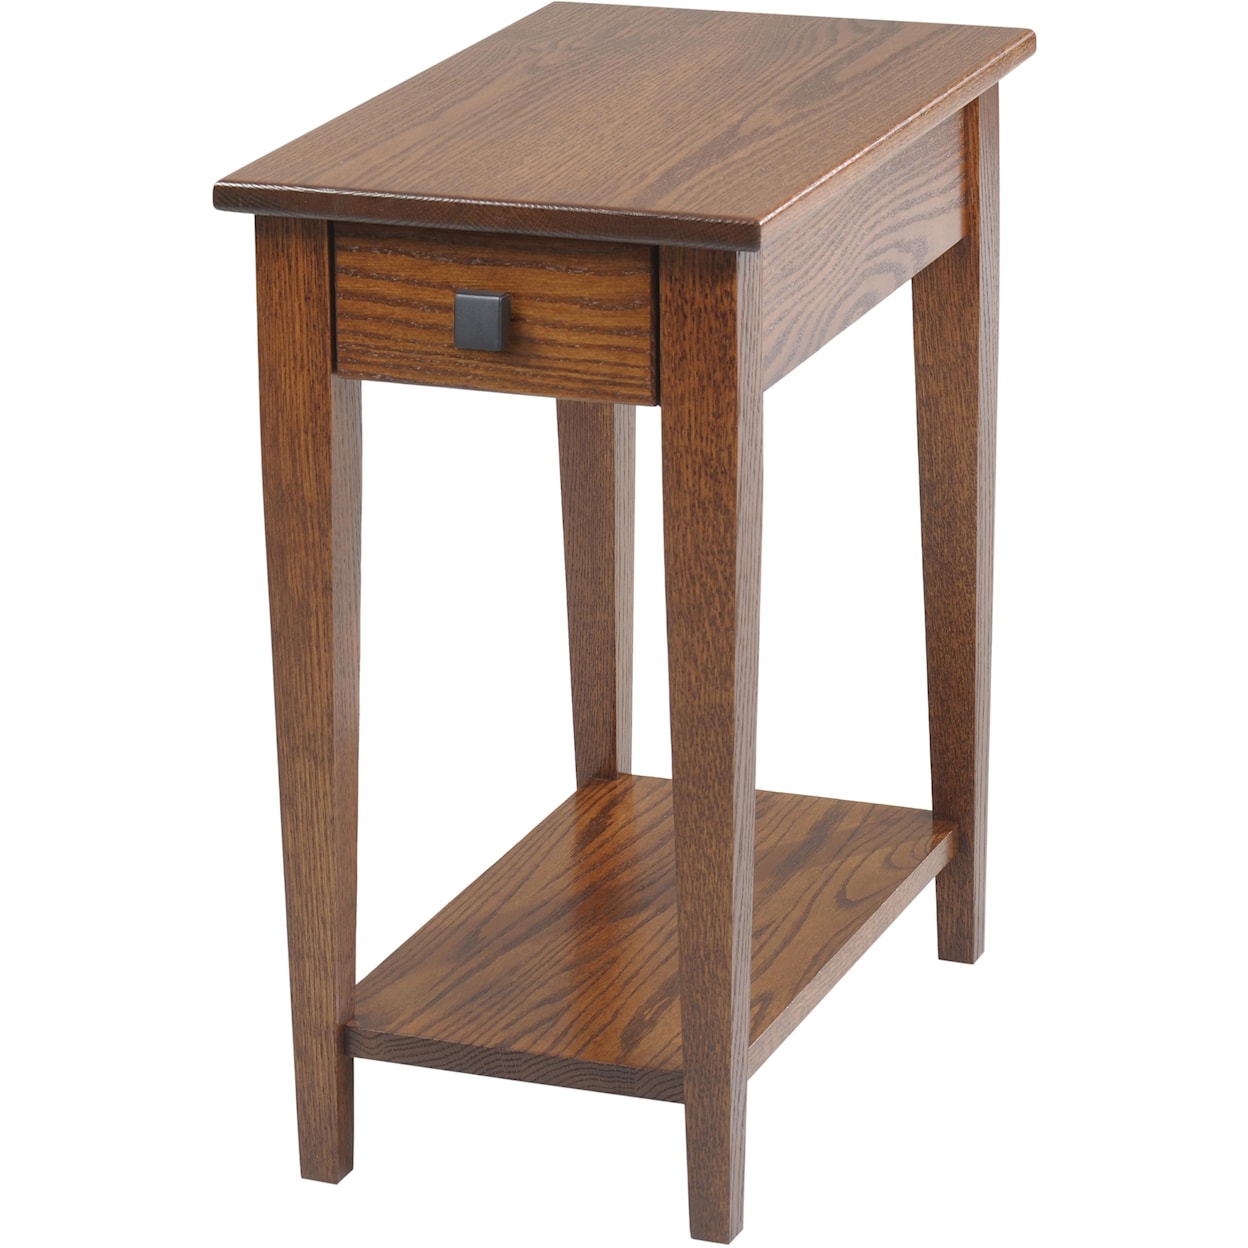 Y & T Woodcraft Woodland Shaker Chairside Table with Shelf